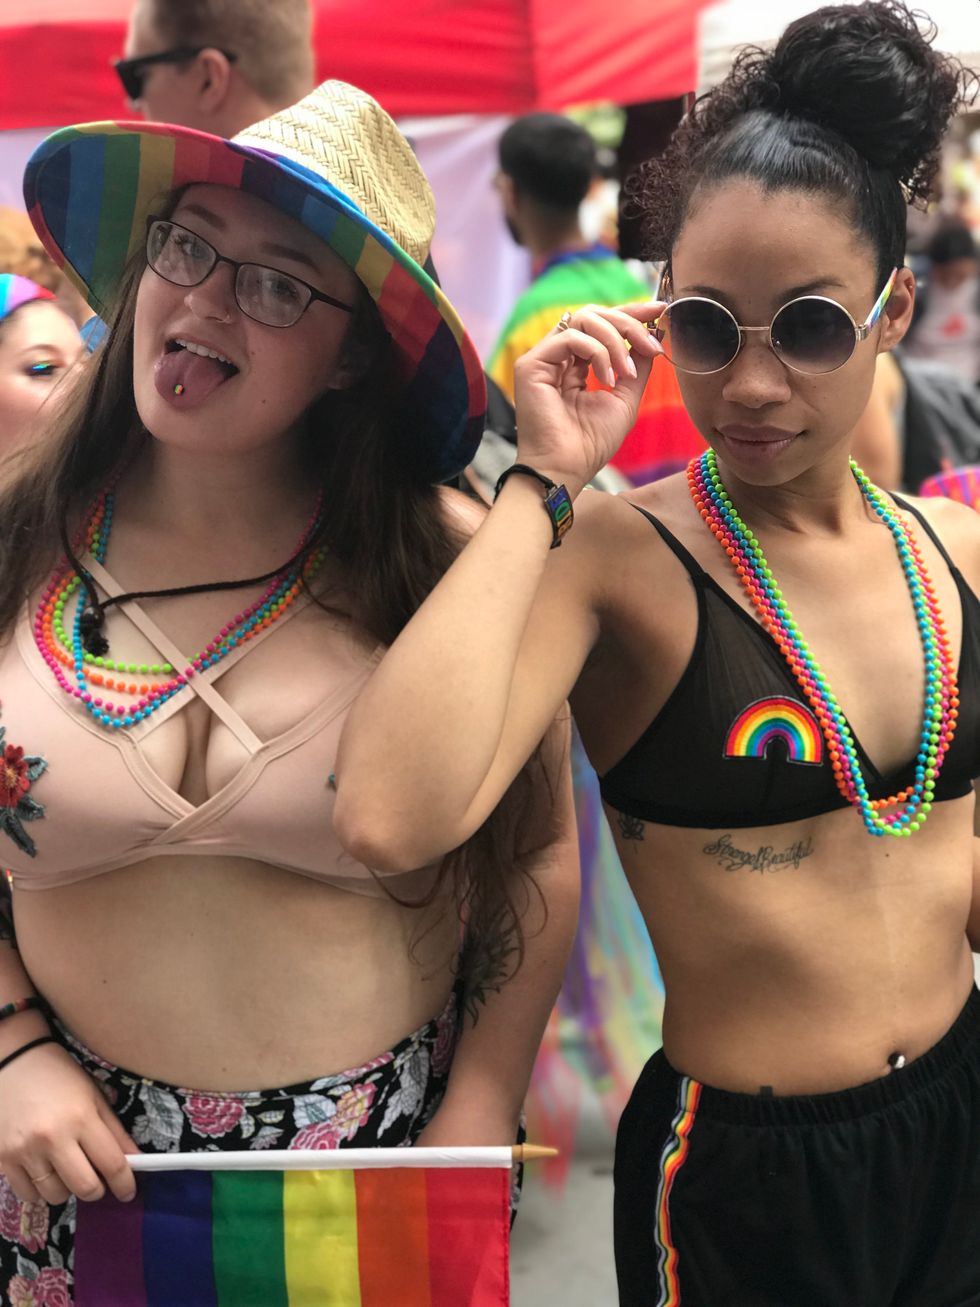 14 Reasons You Should Attend Your Local Pride Events